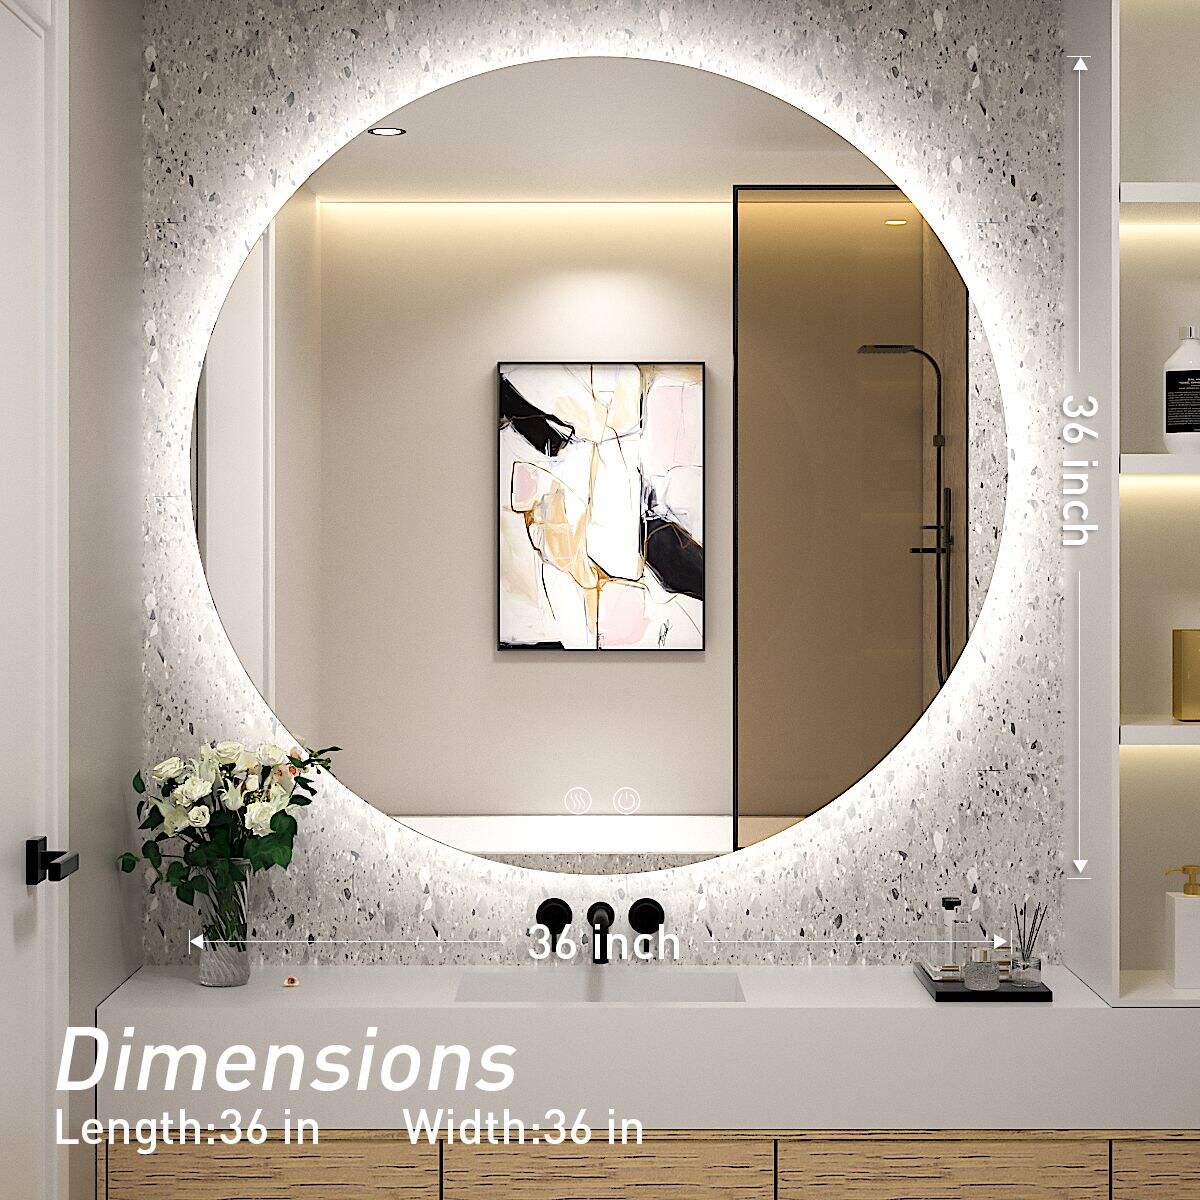 JJGullit bathroom mirror supplier 36 Inch Round Backlit Mirror LED Bathroom Mirror with Lights, Anti-Fog Dimmable Round Lighted Vanity Mirror, Wall Mounted Circle LED Makeup Mirror Touch Switch and CRI 90+